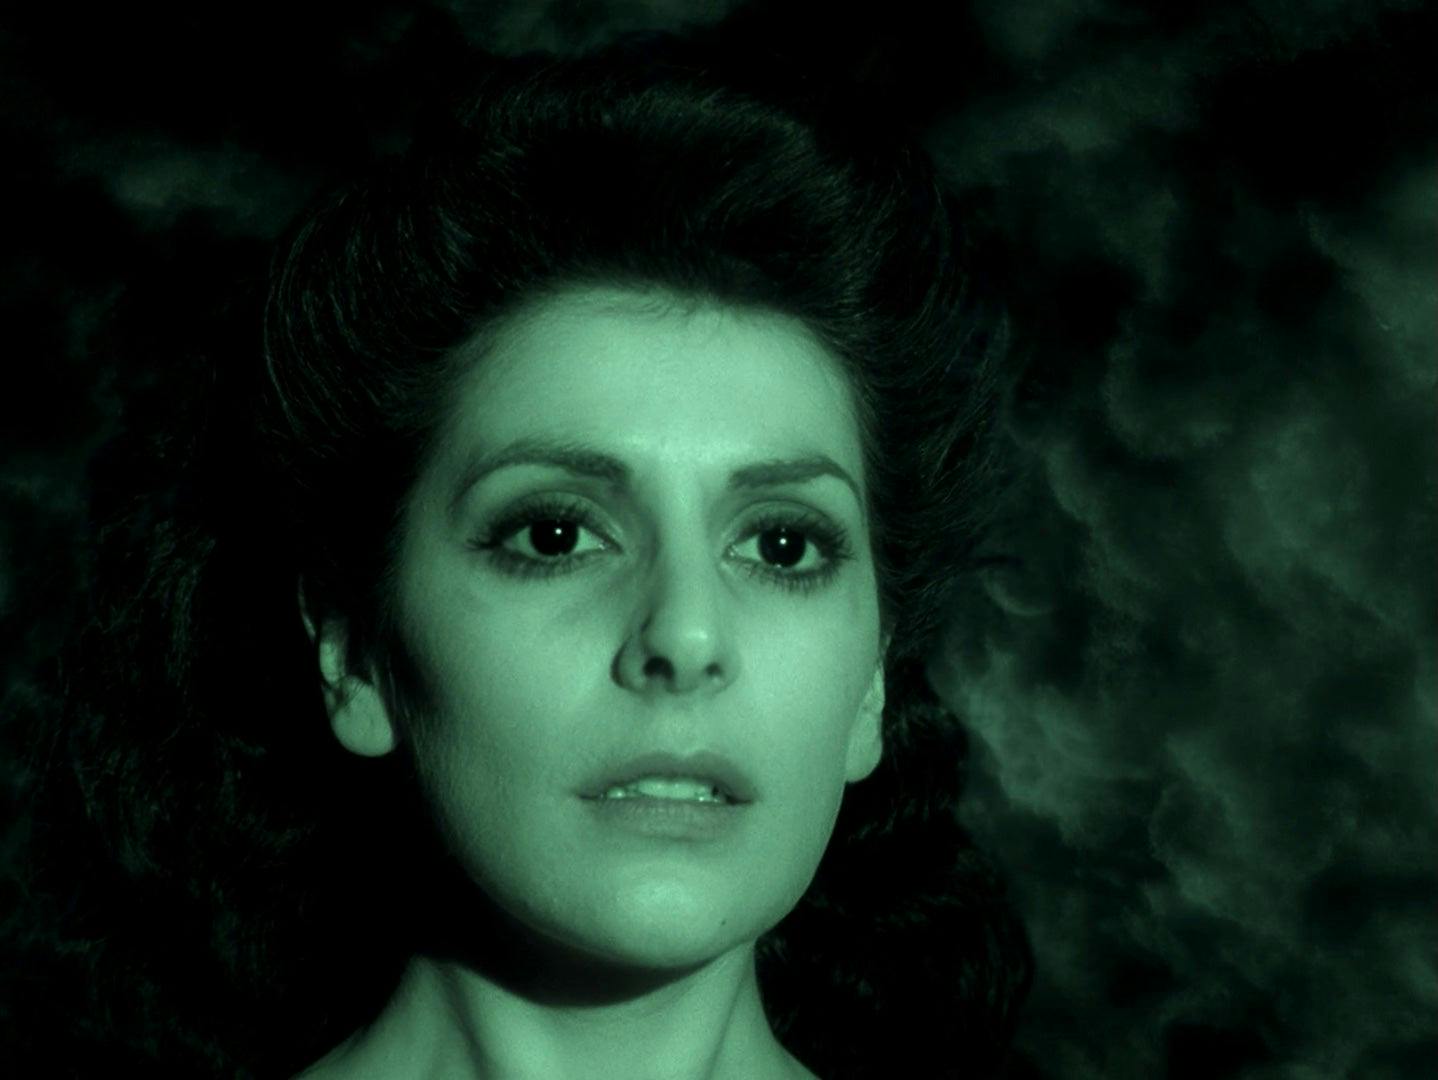 A close up of Deanna Troi bathed in green light.